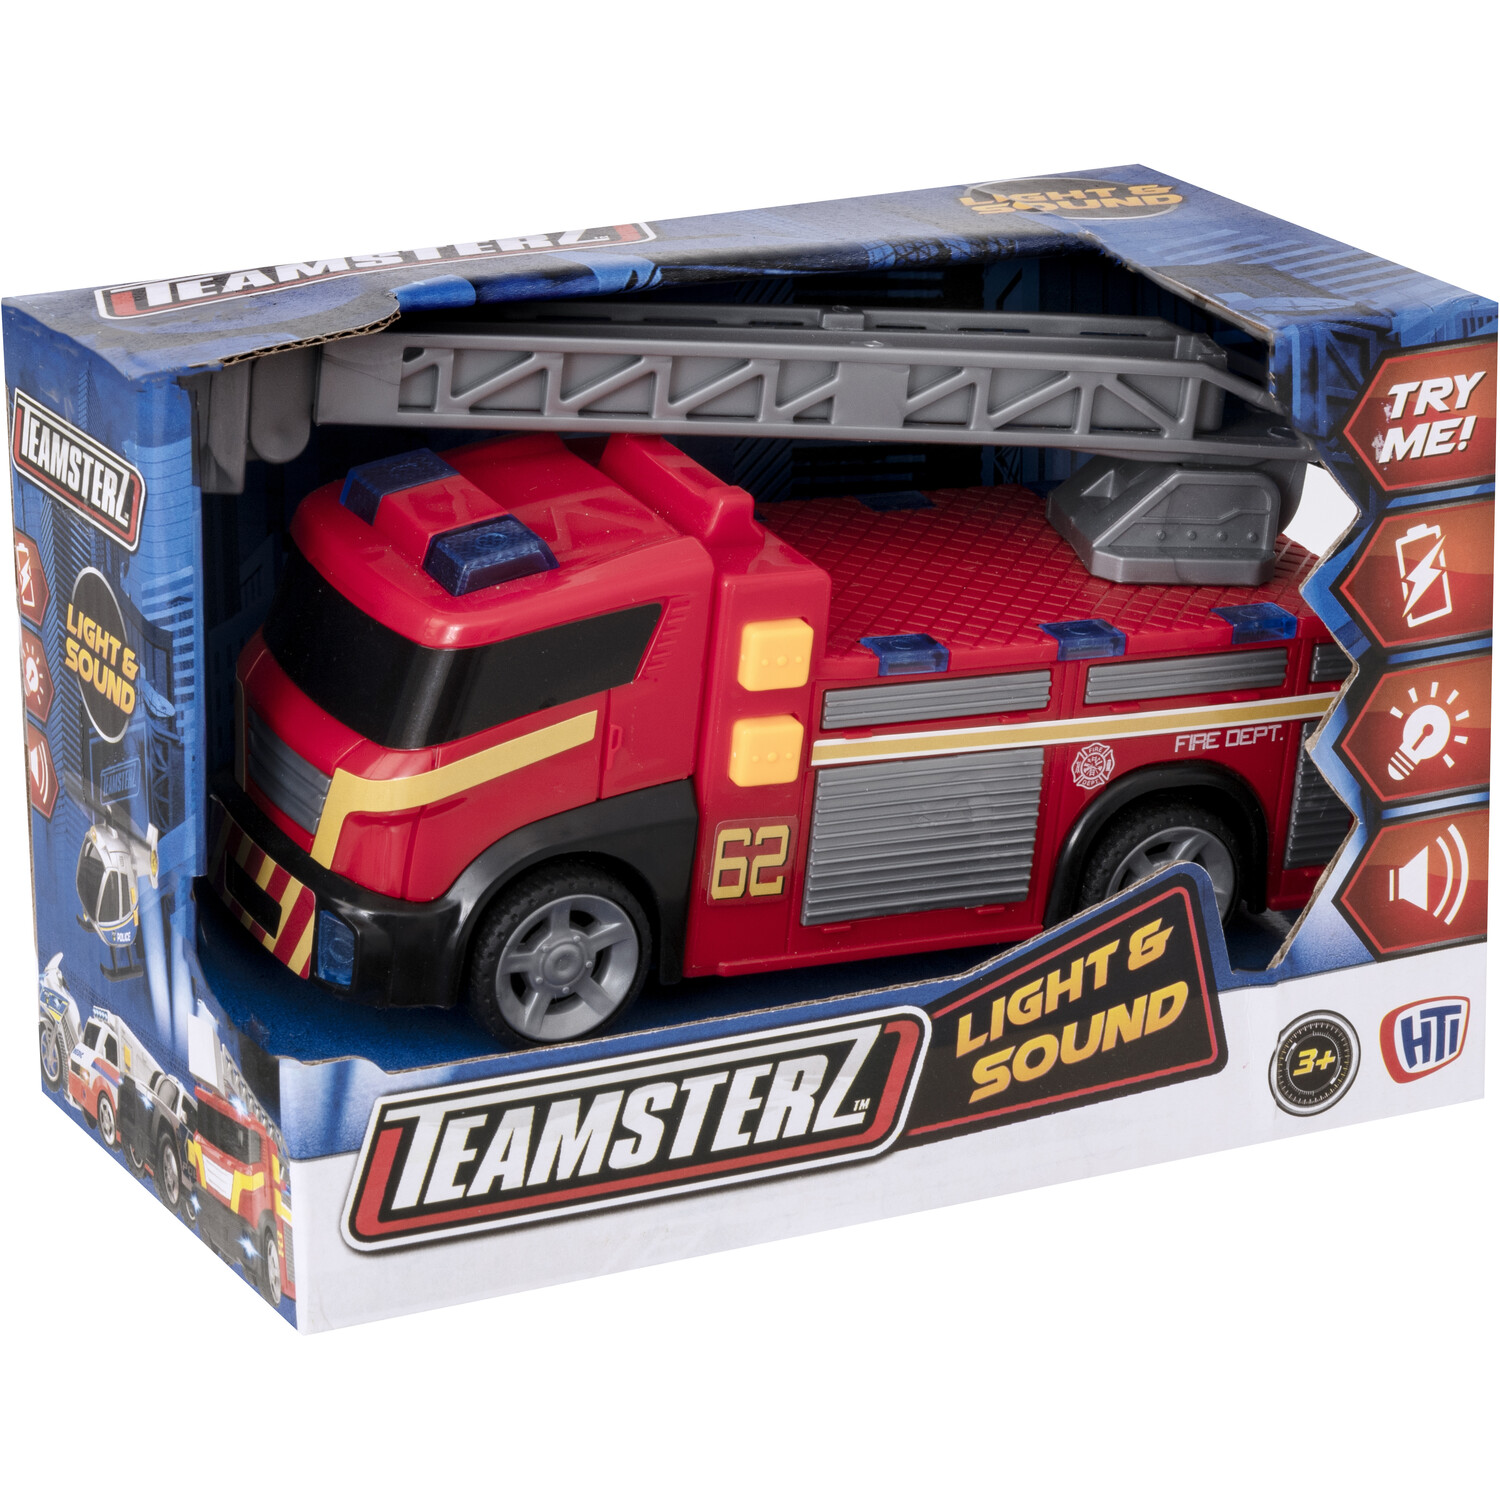 Teamsterz Small Light and Sound Fire Engine Toy Image